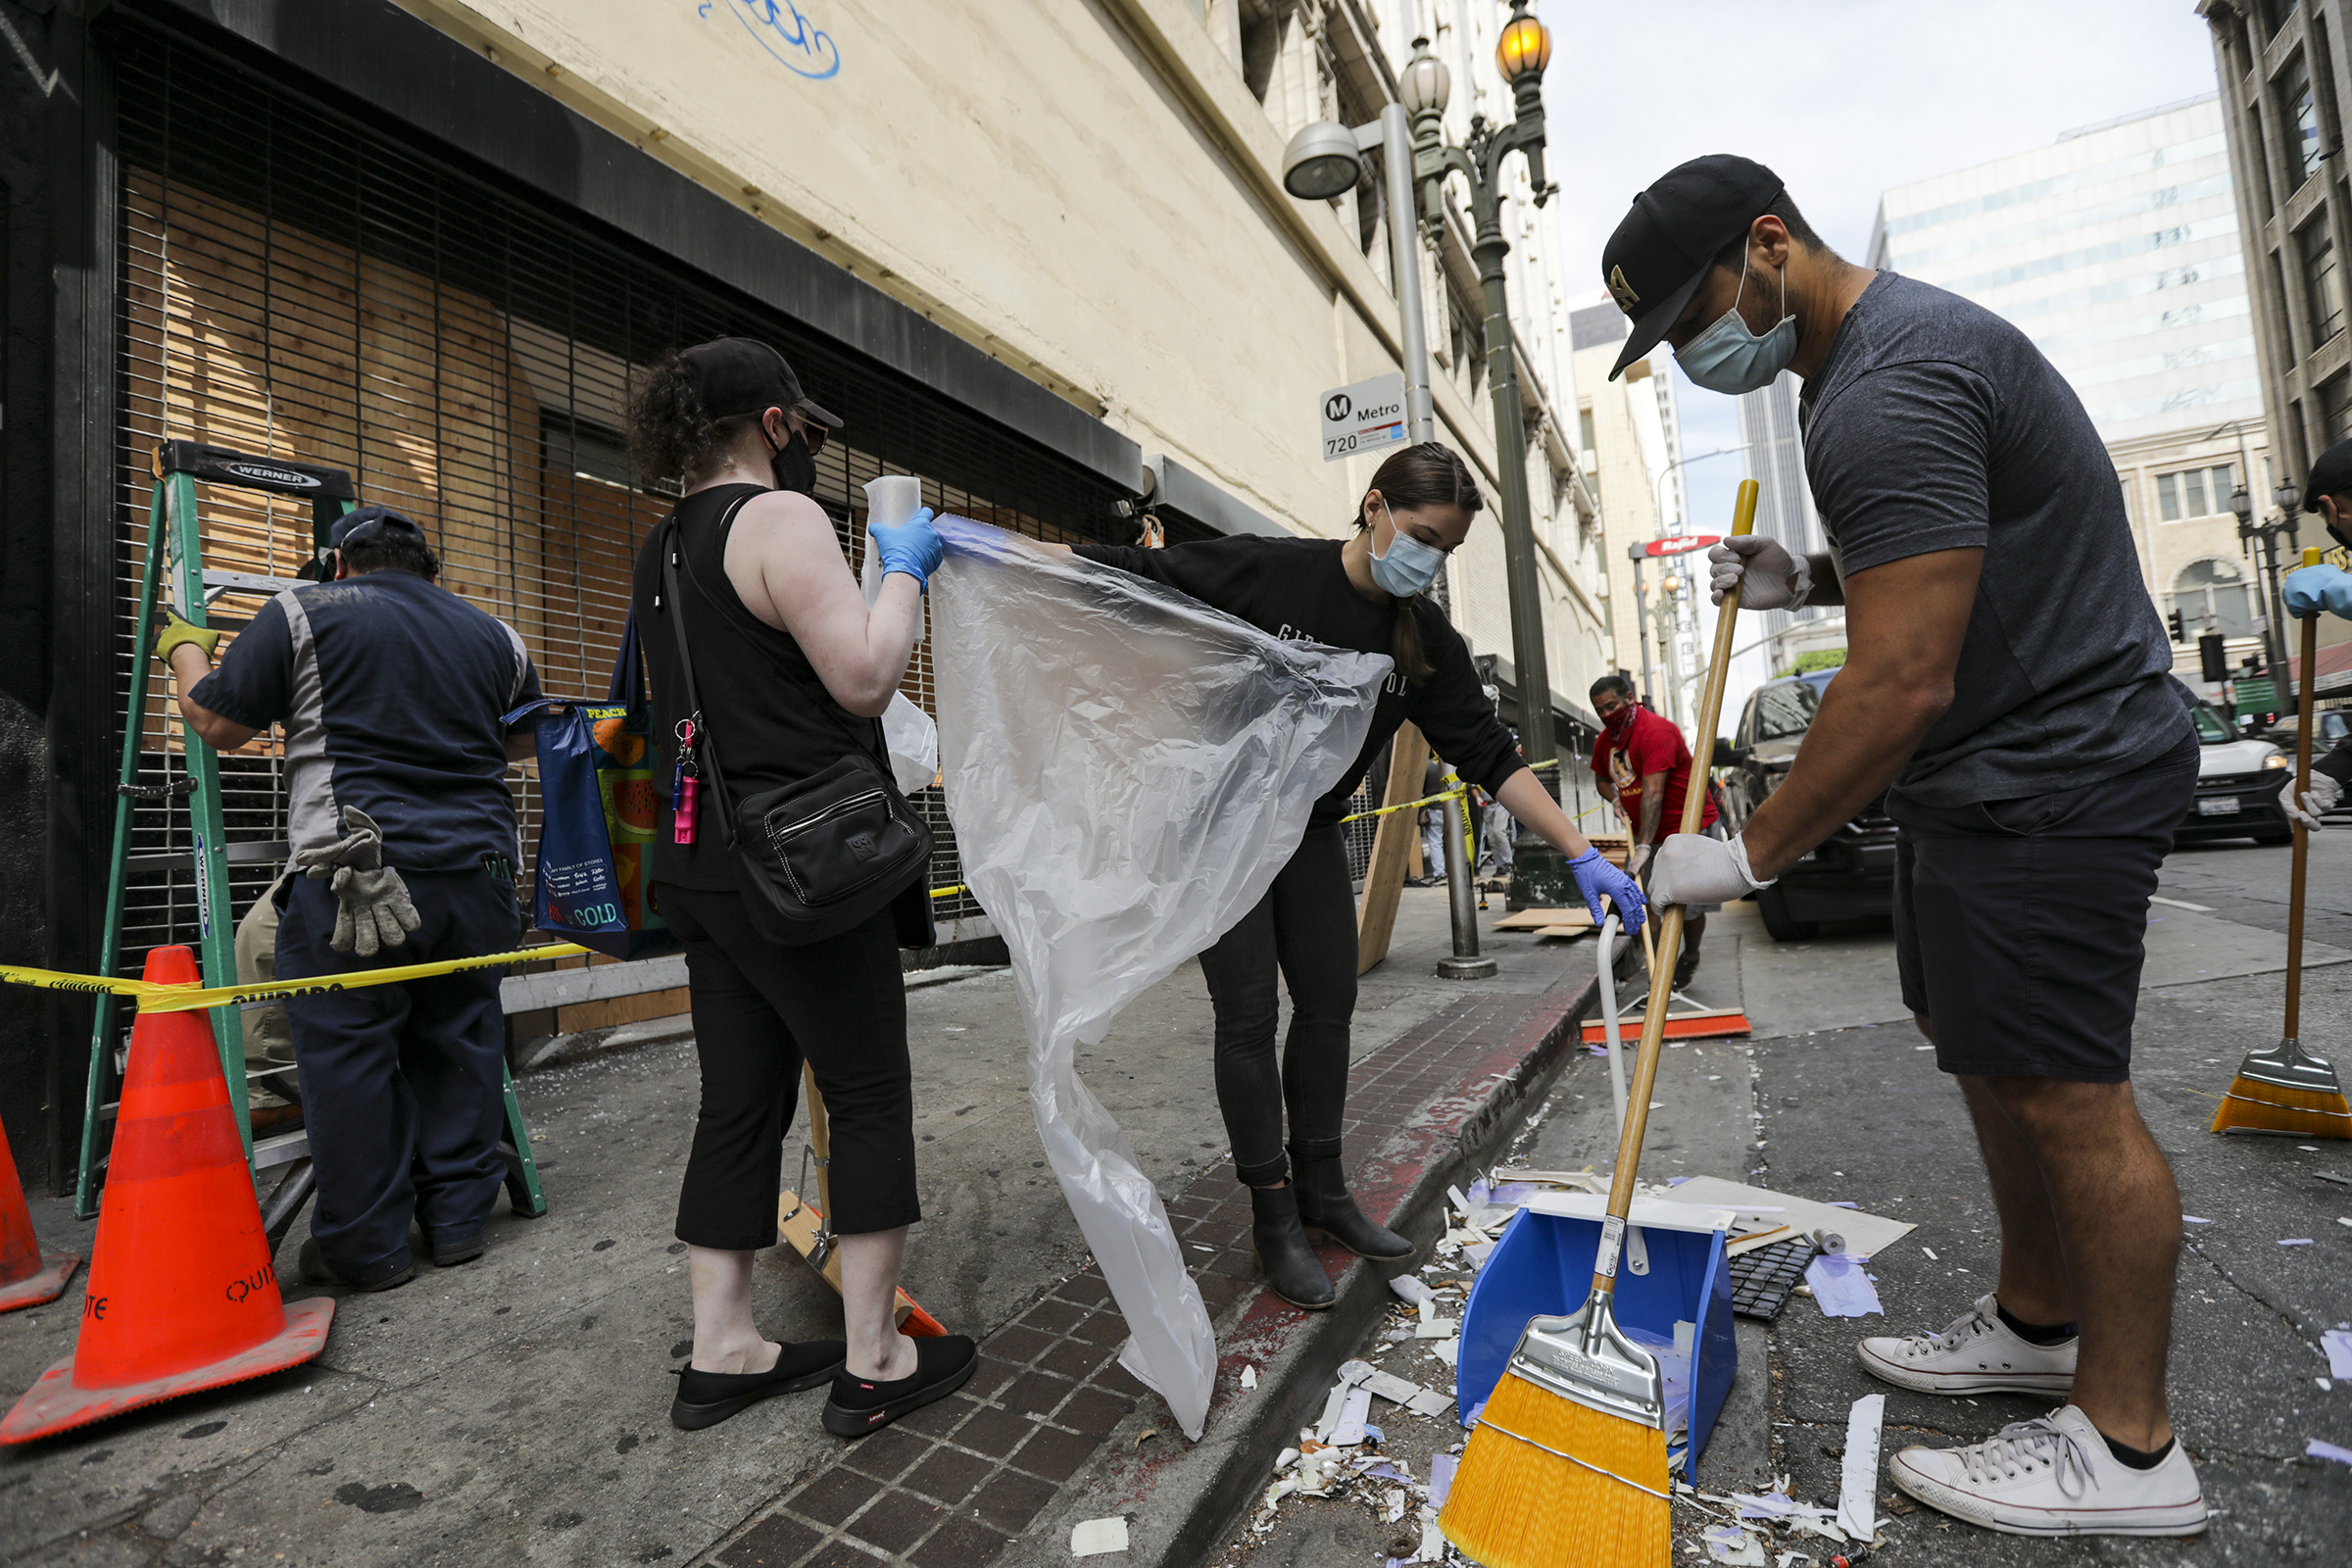 PHOTO: A group volunteers from DTLA Town Square help clean up the streets littered with broken glasses and trash after last night protest of the killing of George Floyd, May 30, 2020 in Los Angeles.